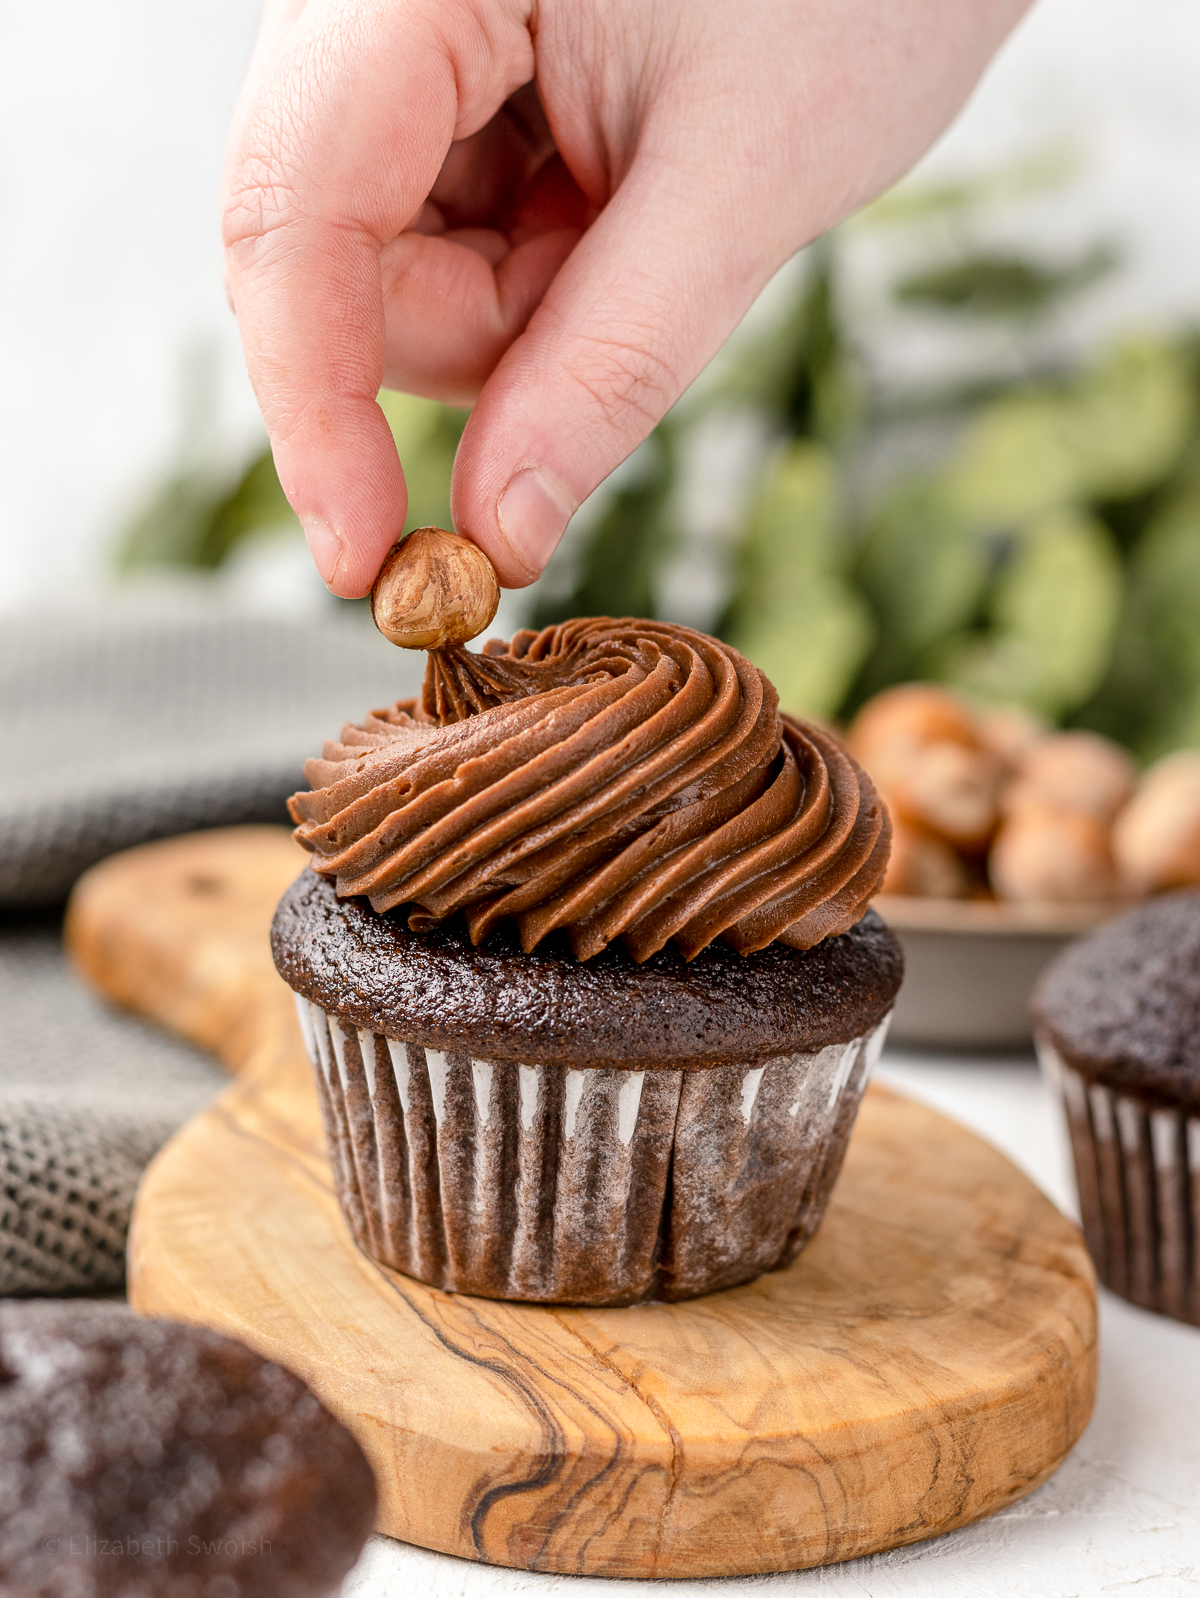 Topping cupcake with a roasted hazelnut.